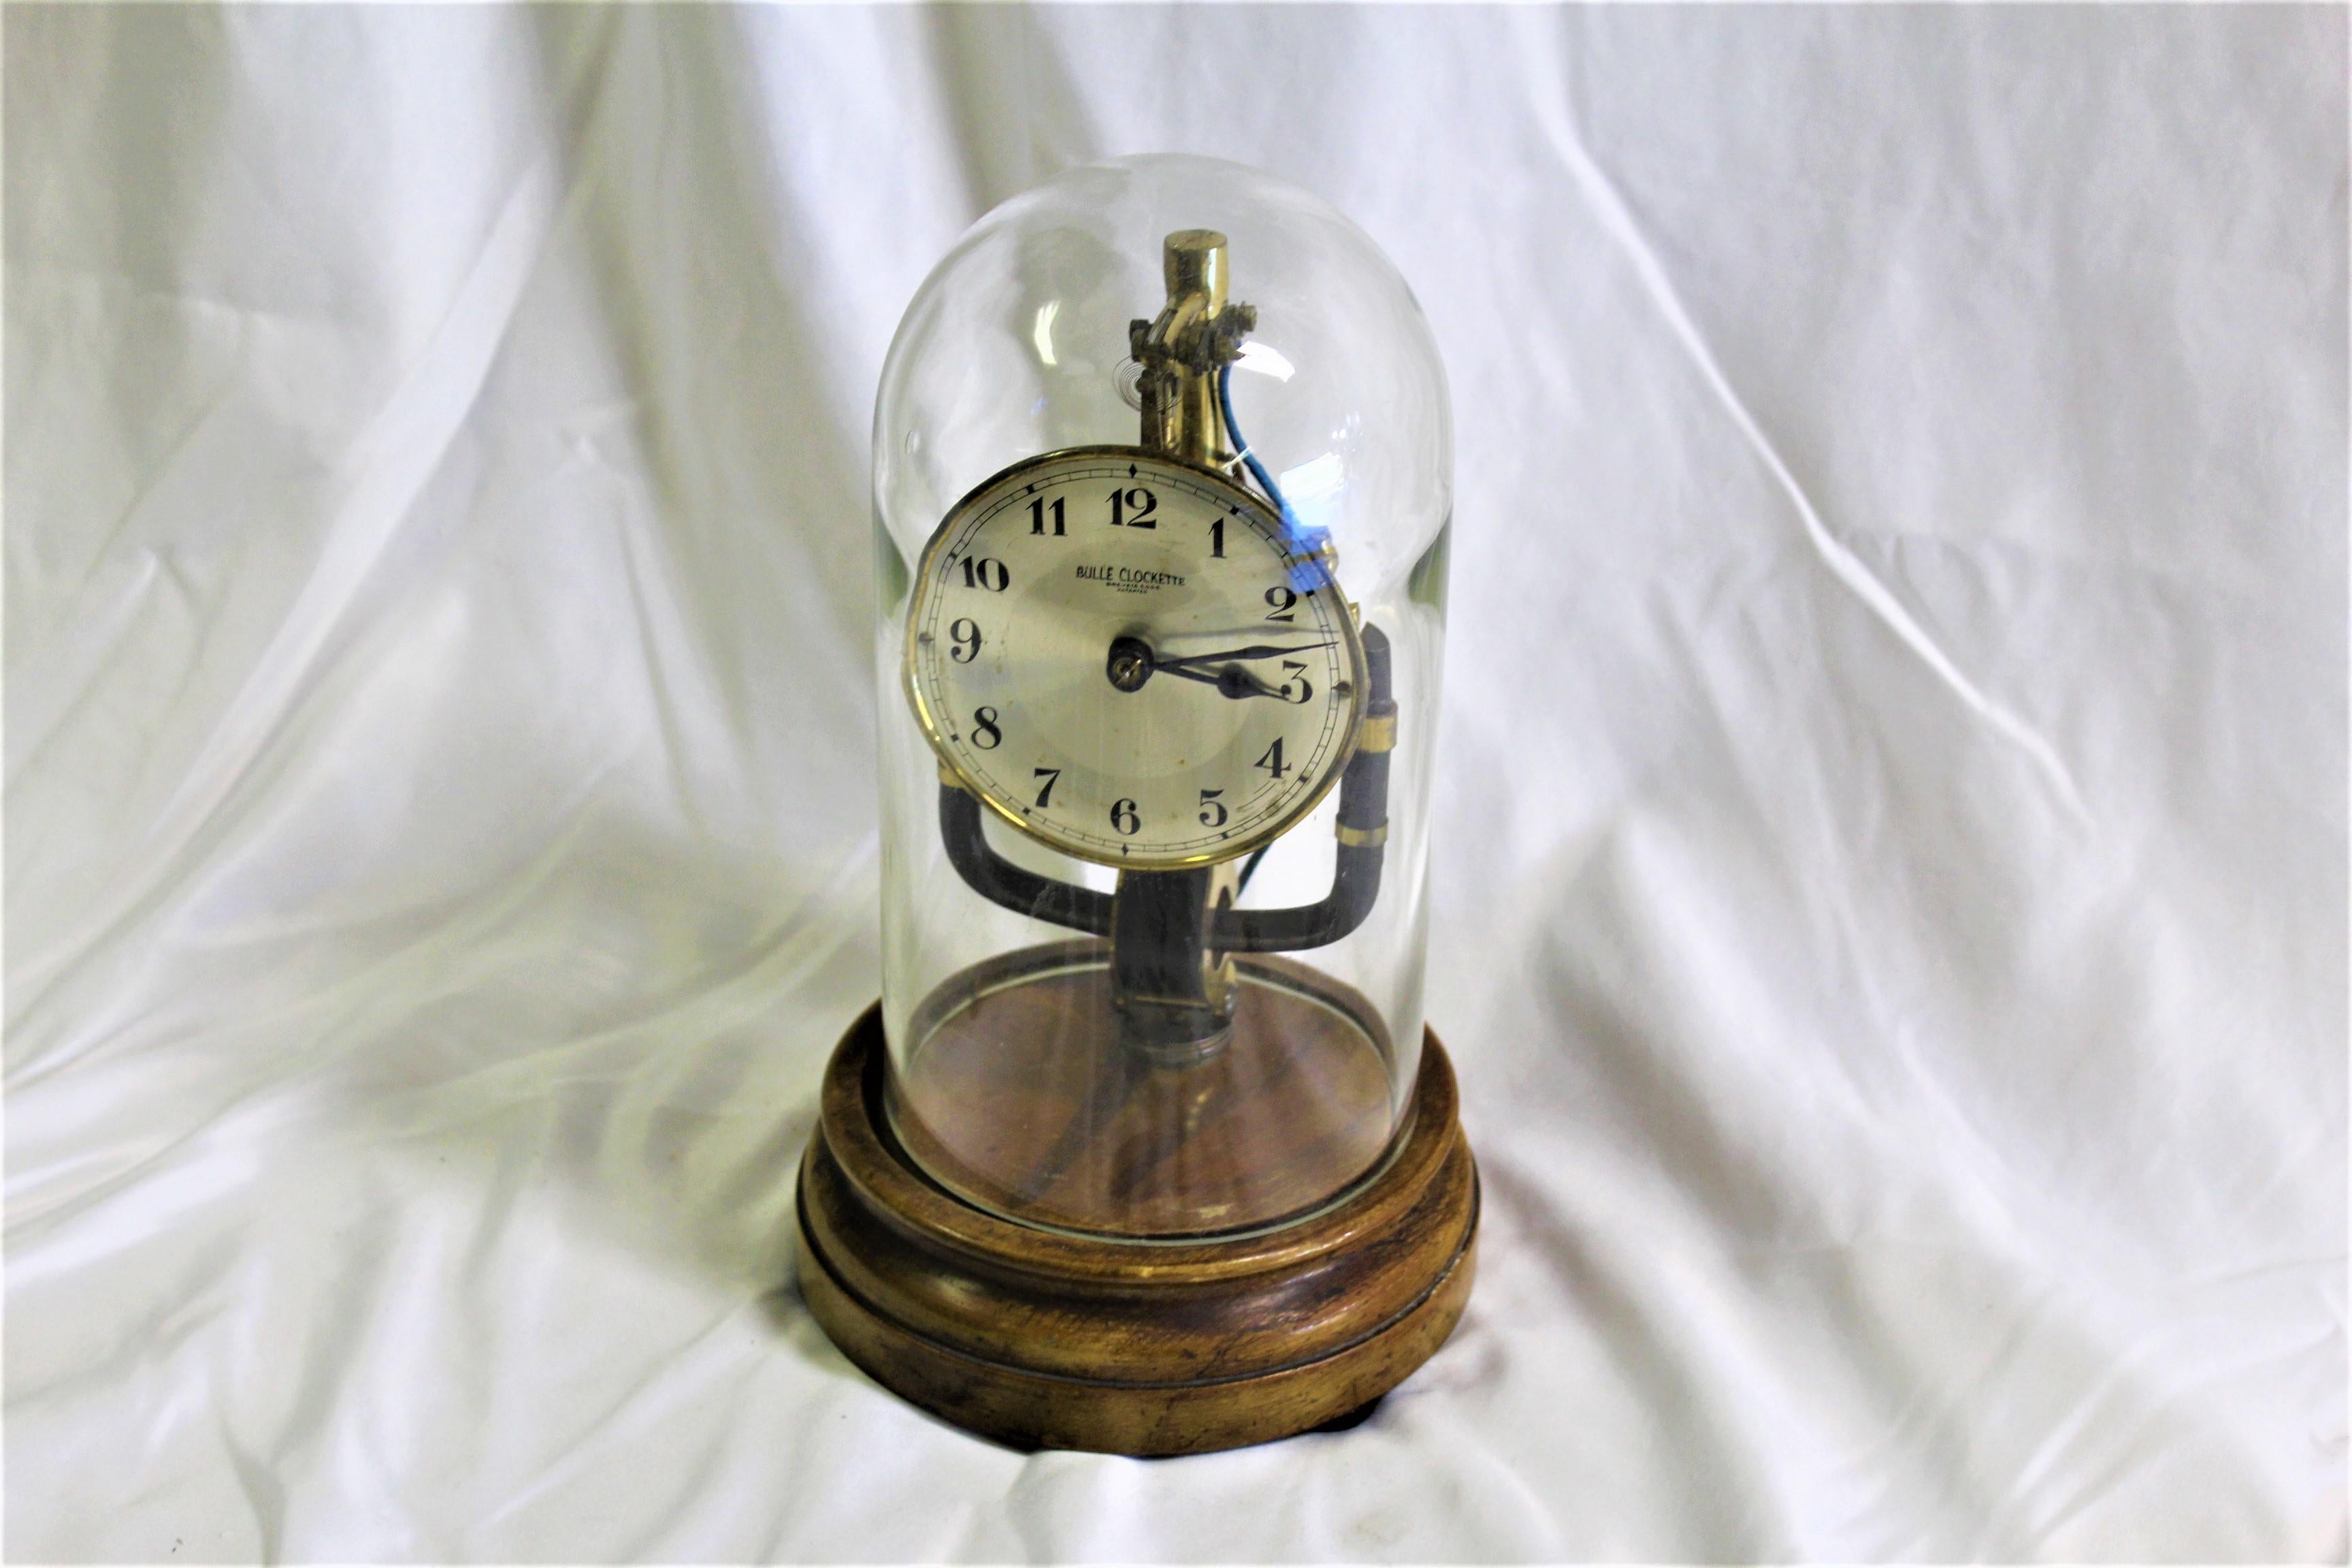 This is a small Clockett Clock made by Bulle. Picked it up in London long ago. Battery Magnetic clock kept under glass dome. The glass dome maybe a replacement. They never last long. Requires special packing and shipping. Can quote at time of sale.